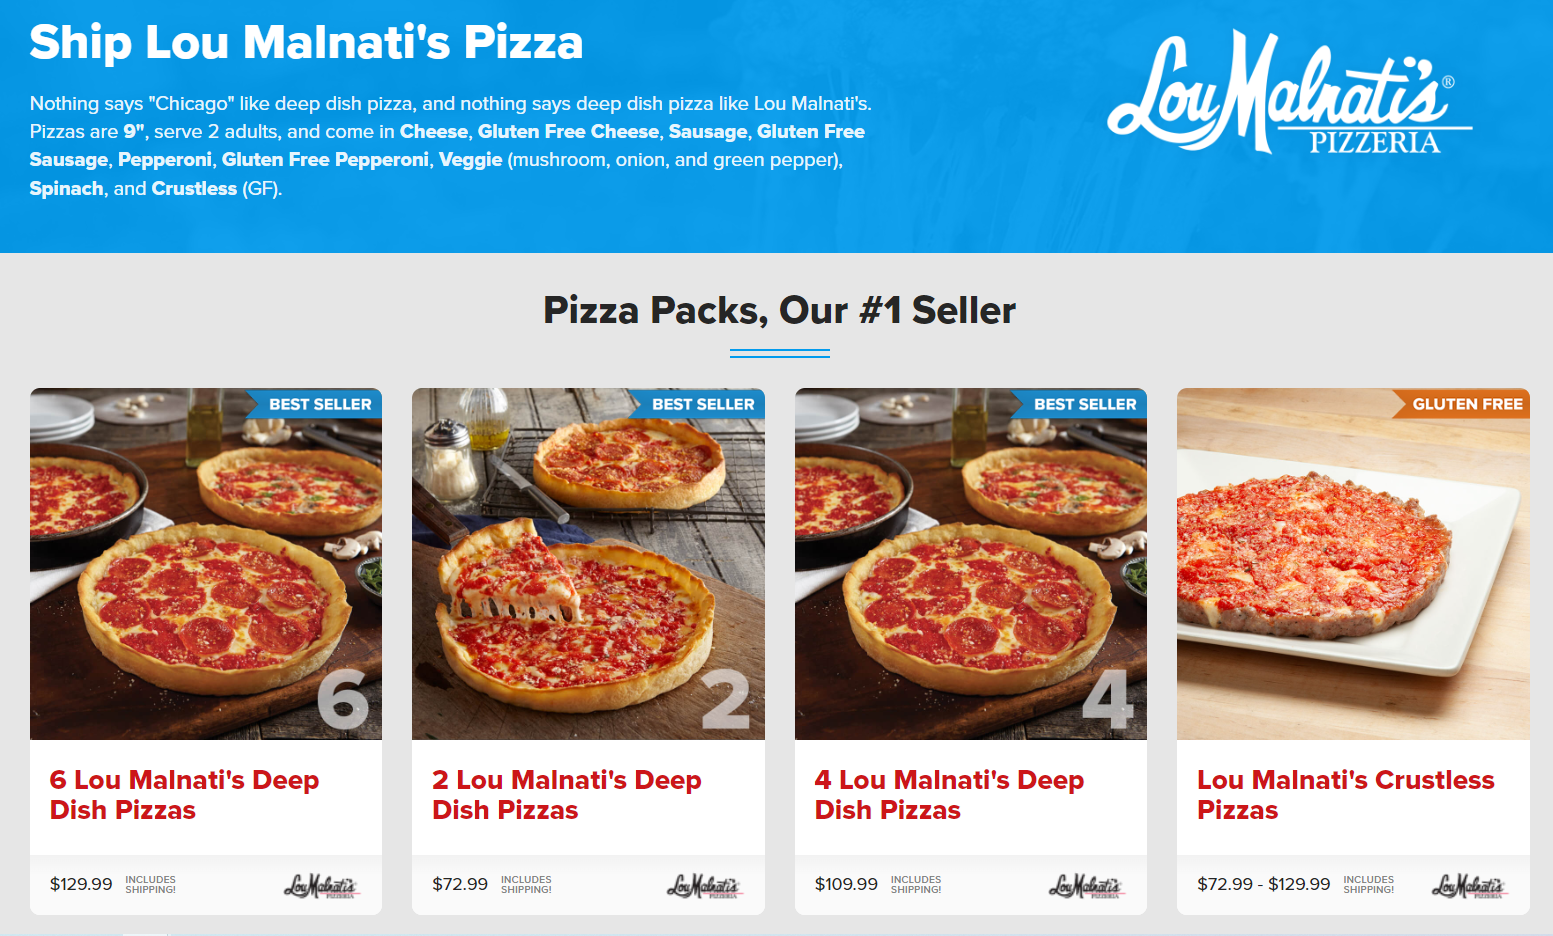 On the Lou Malnati's restaurant website, the customers can order pizzas even to another state